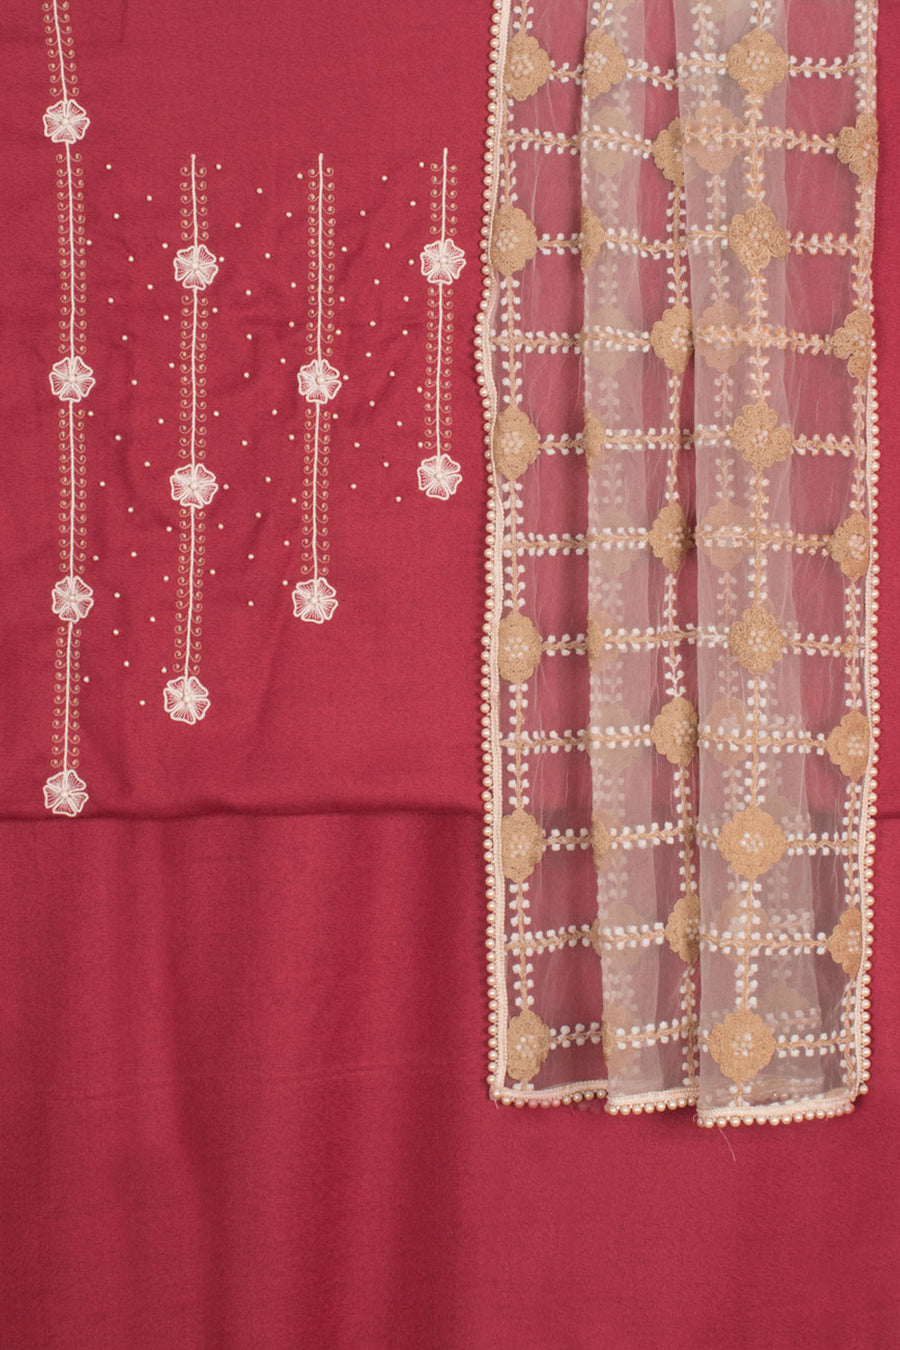 Hand Embroidered Blended Cotton 3-Piece Salwar Suit Material with Pearl Work Yoke and Fancy Net Dupatta